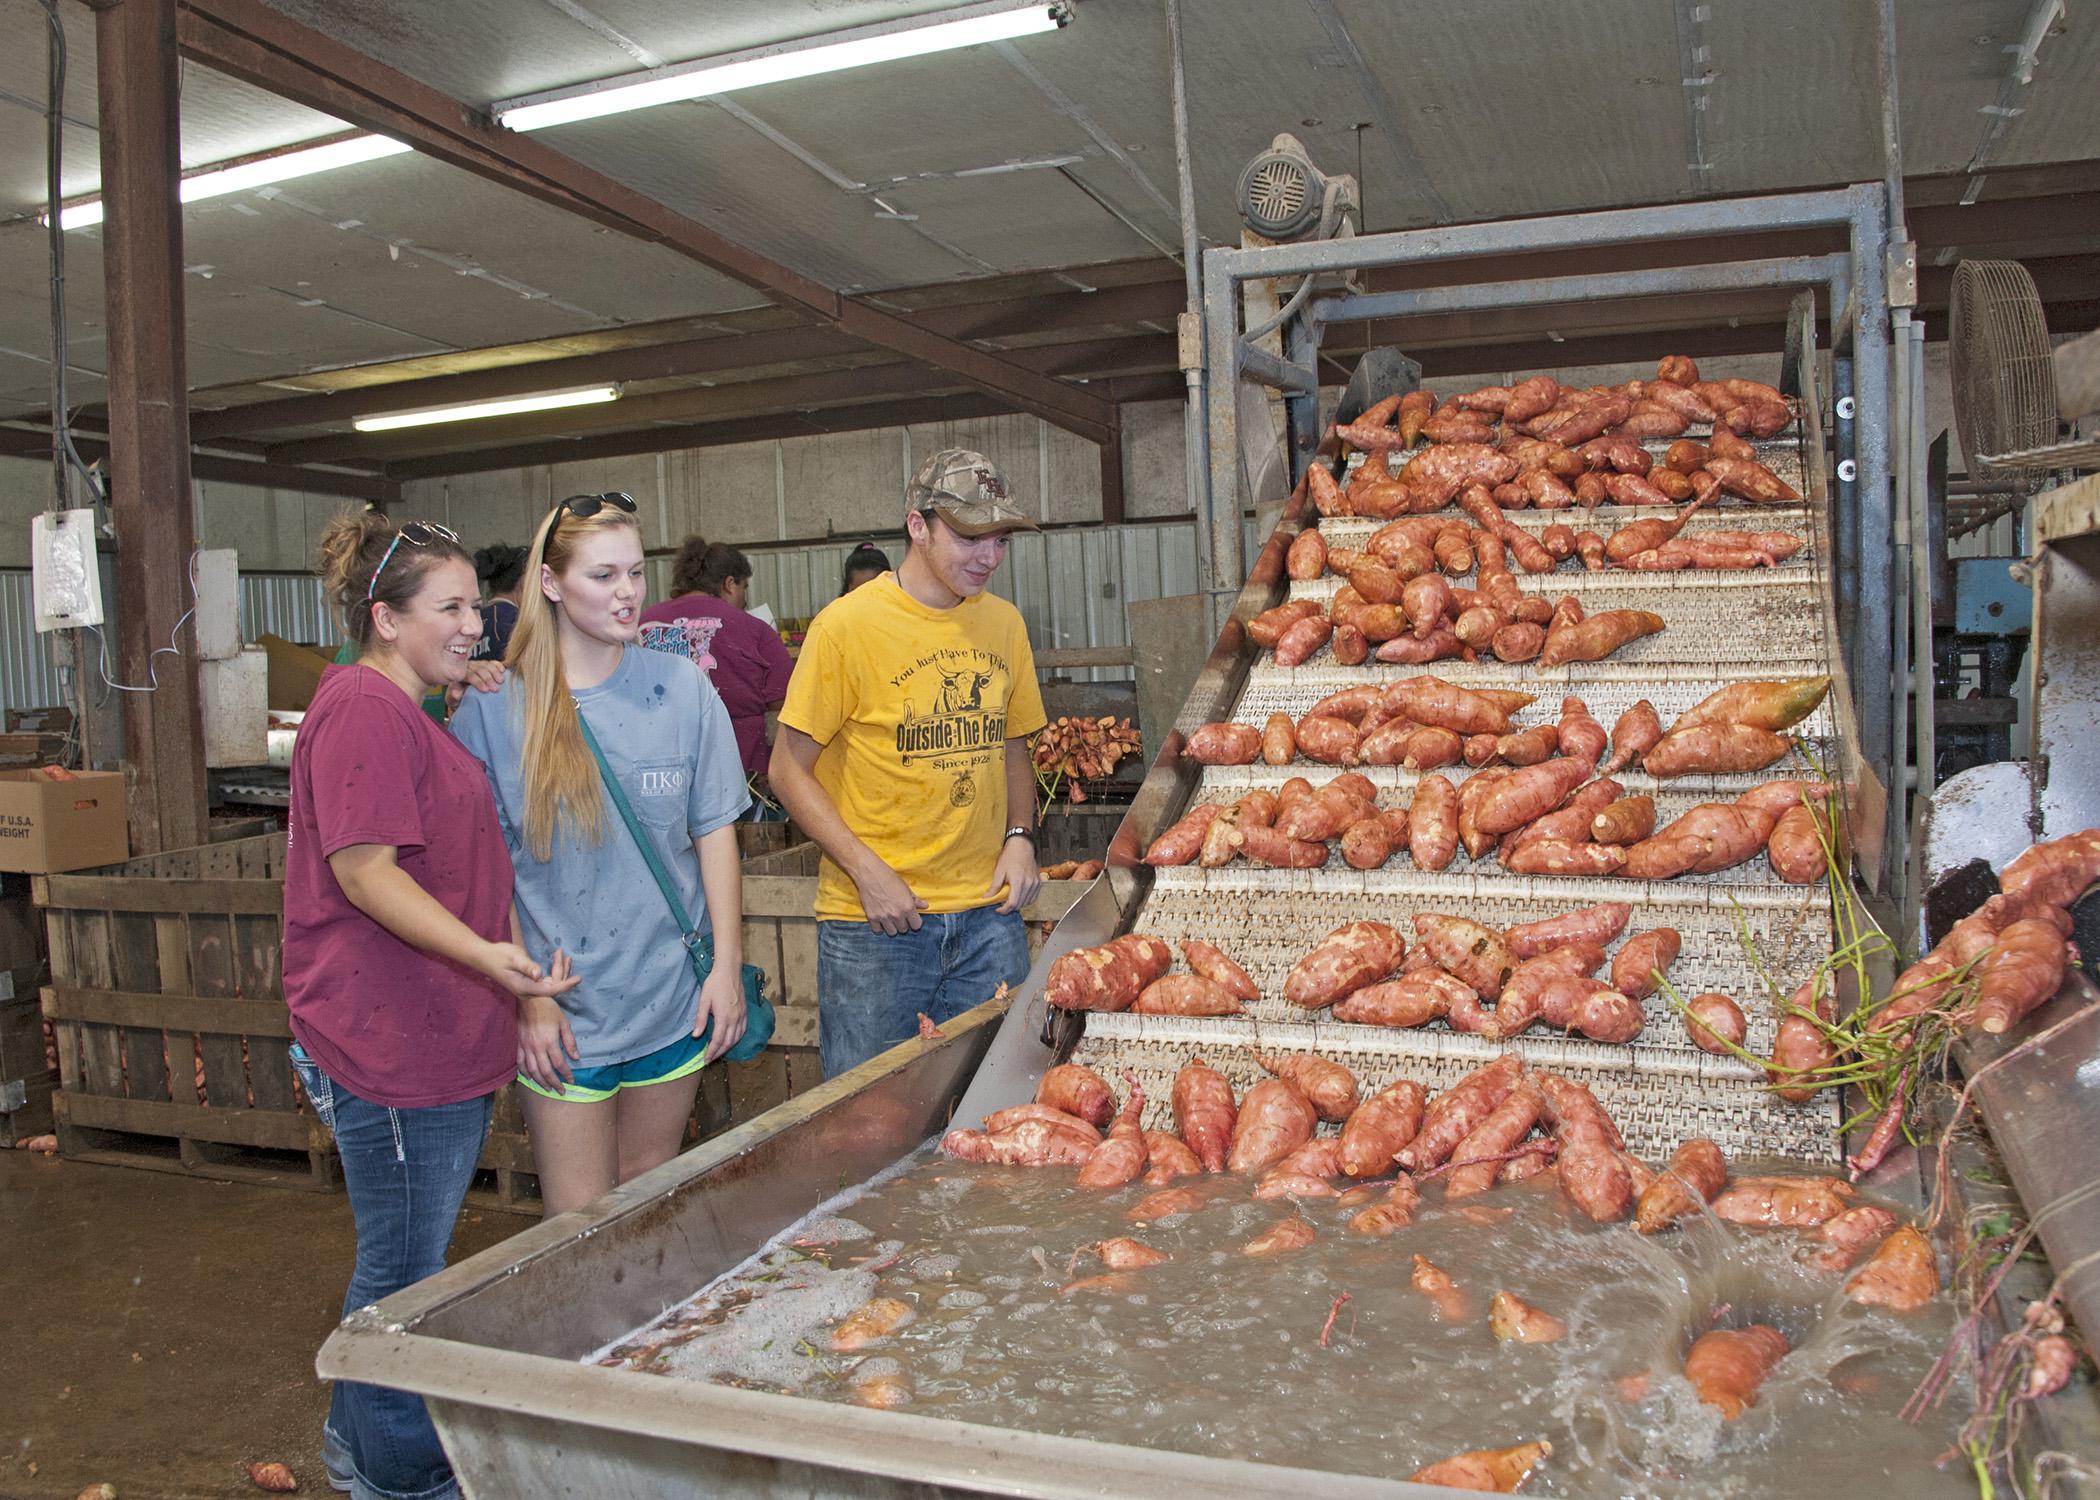 Mississippi State University students in the Department of Food Science, Nutrition and Health Promotion (from left) Morgan Von Staden, Hanna Olstad and Andrew Moorhead observe the washing process on a sweet potato packing line Sept. 5, 2014, in Vardaman, Mississippi. (Photo by MSU Ag Communications/Kat Lawrence)